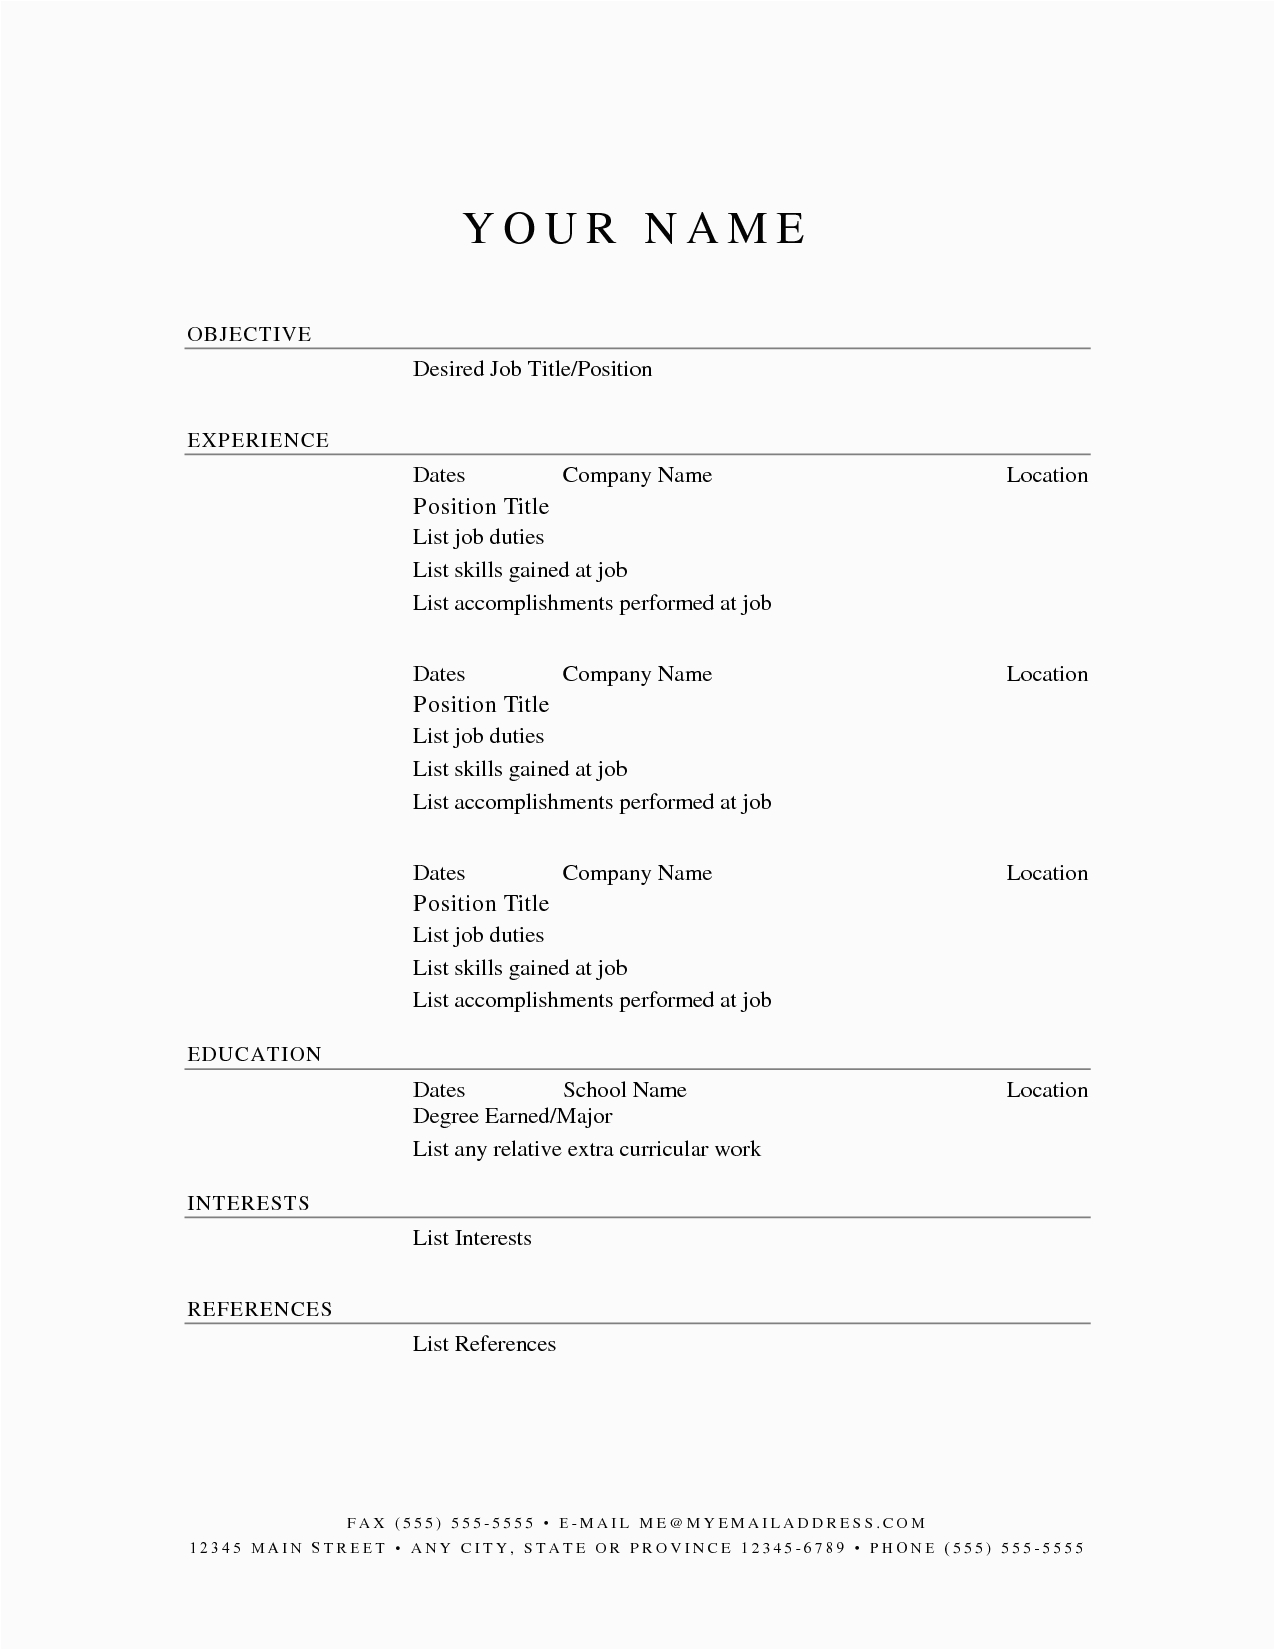 Free Printable Fill In the Blank Resume Templates Free Printable Fill In the Blank Resume Templates